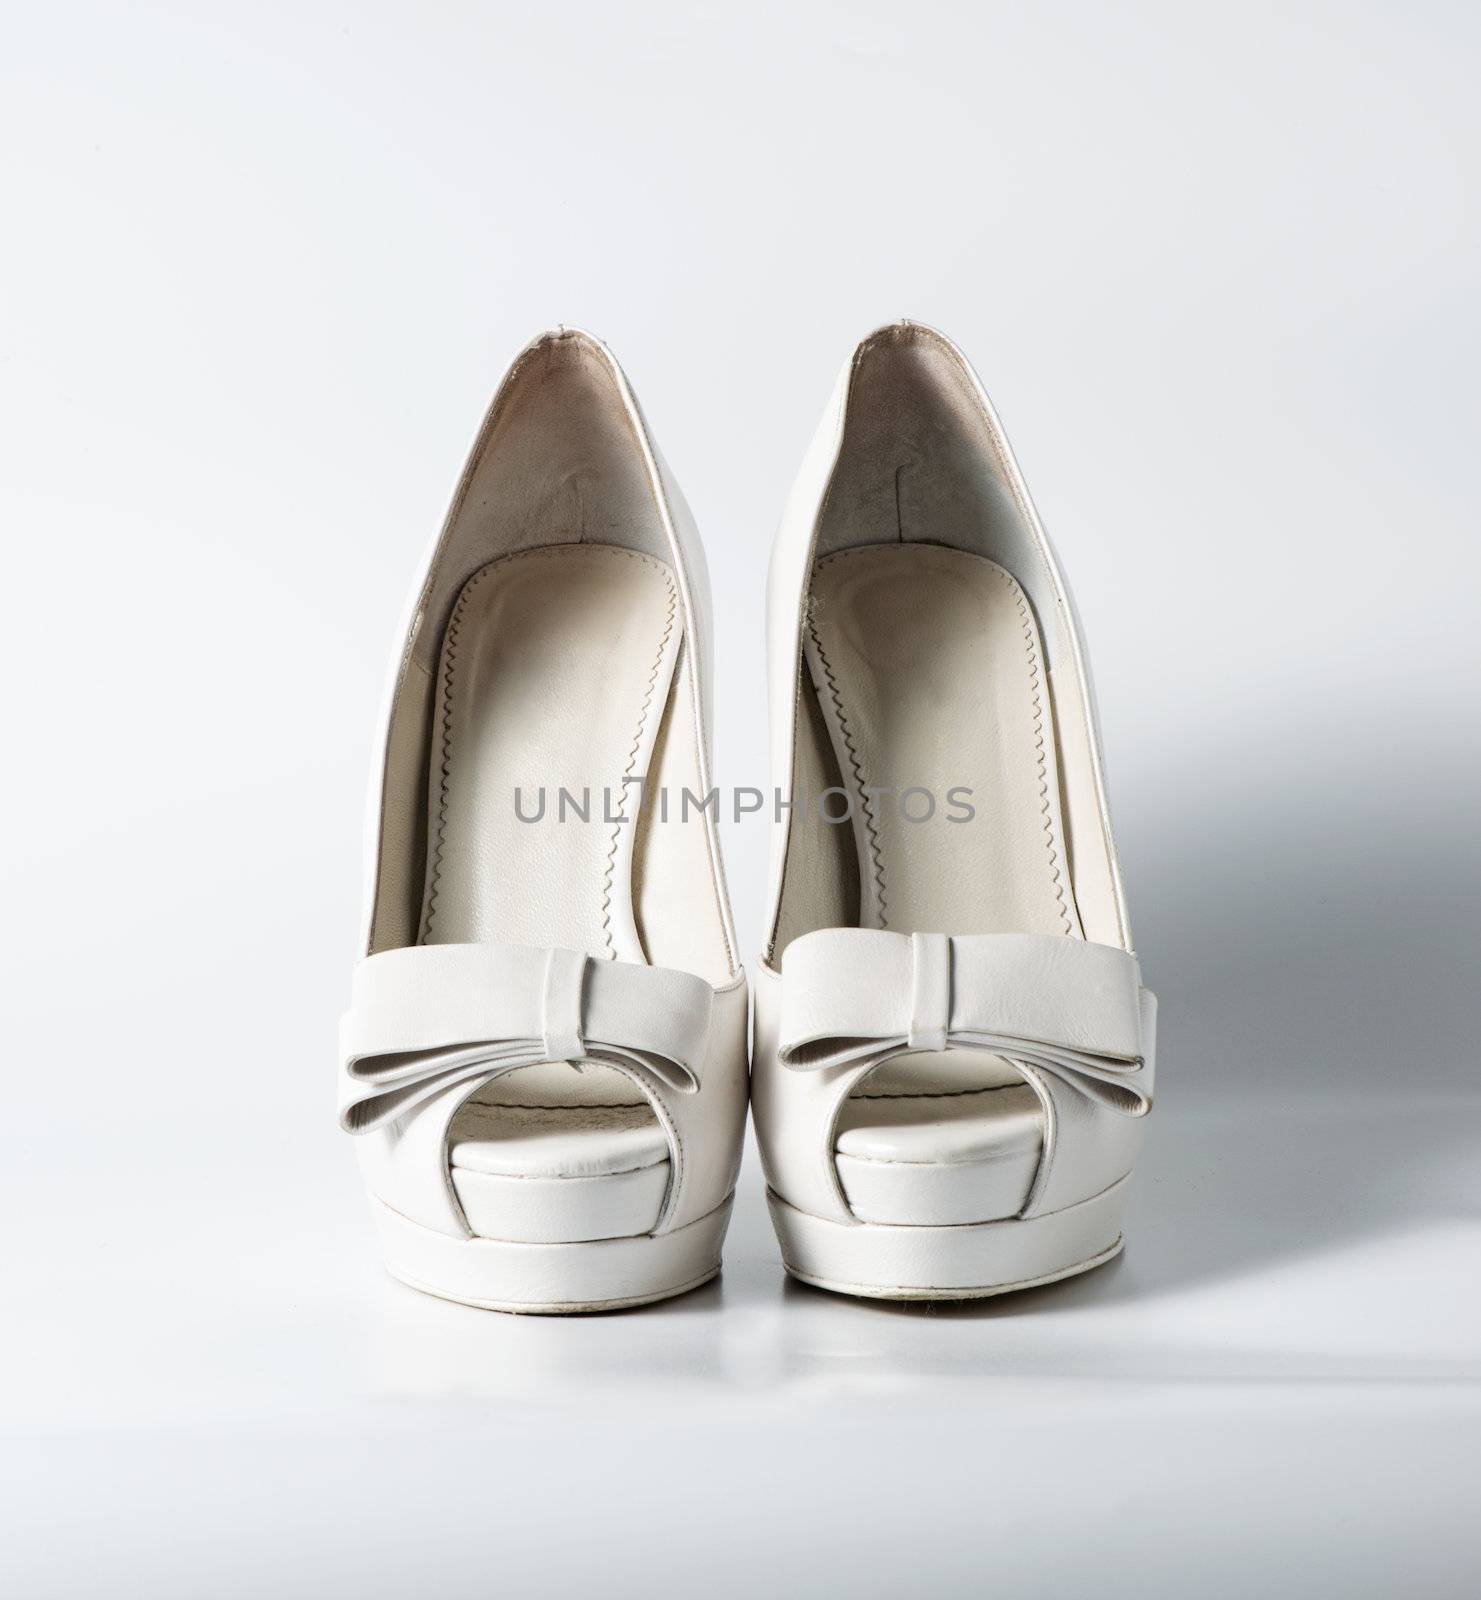 Woman white shoes on white background